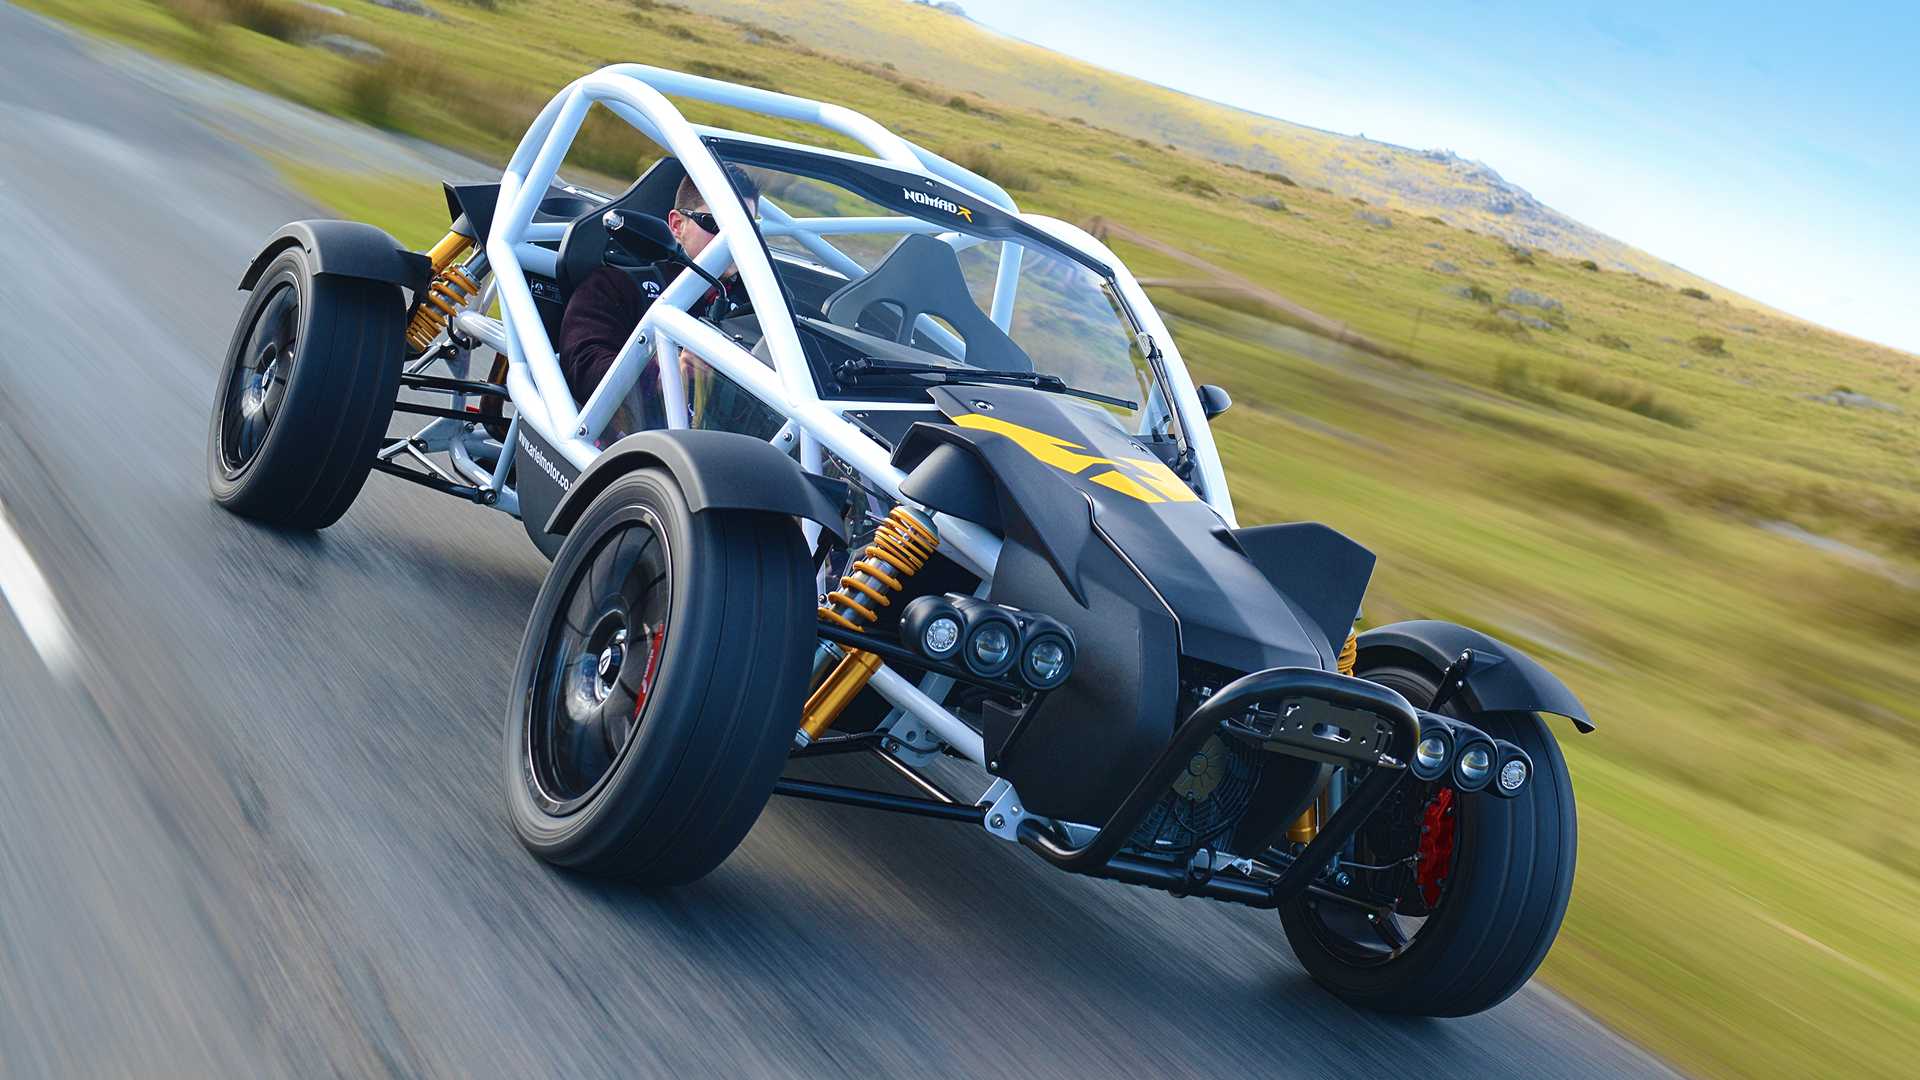 The new Ariel Nomad R is an off-the-scale off-roader